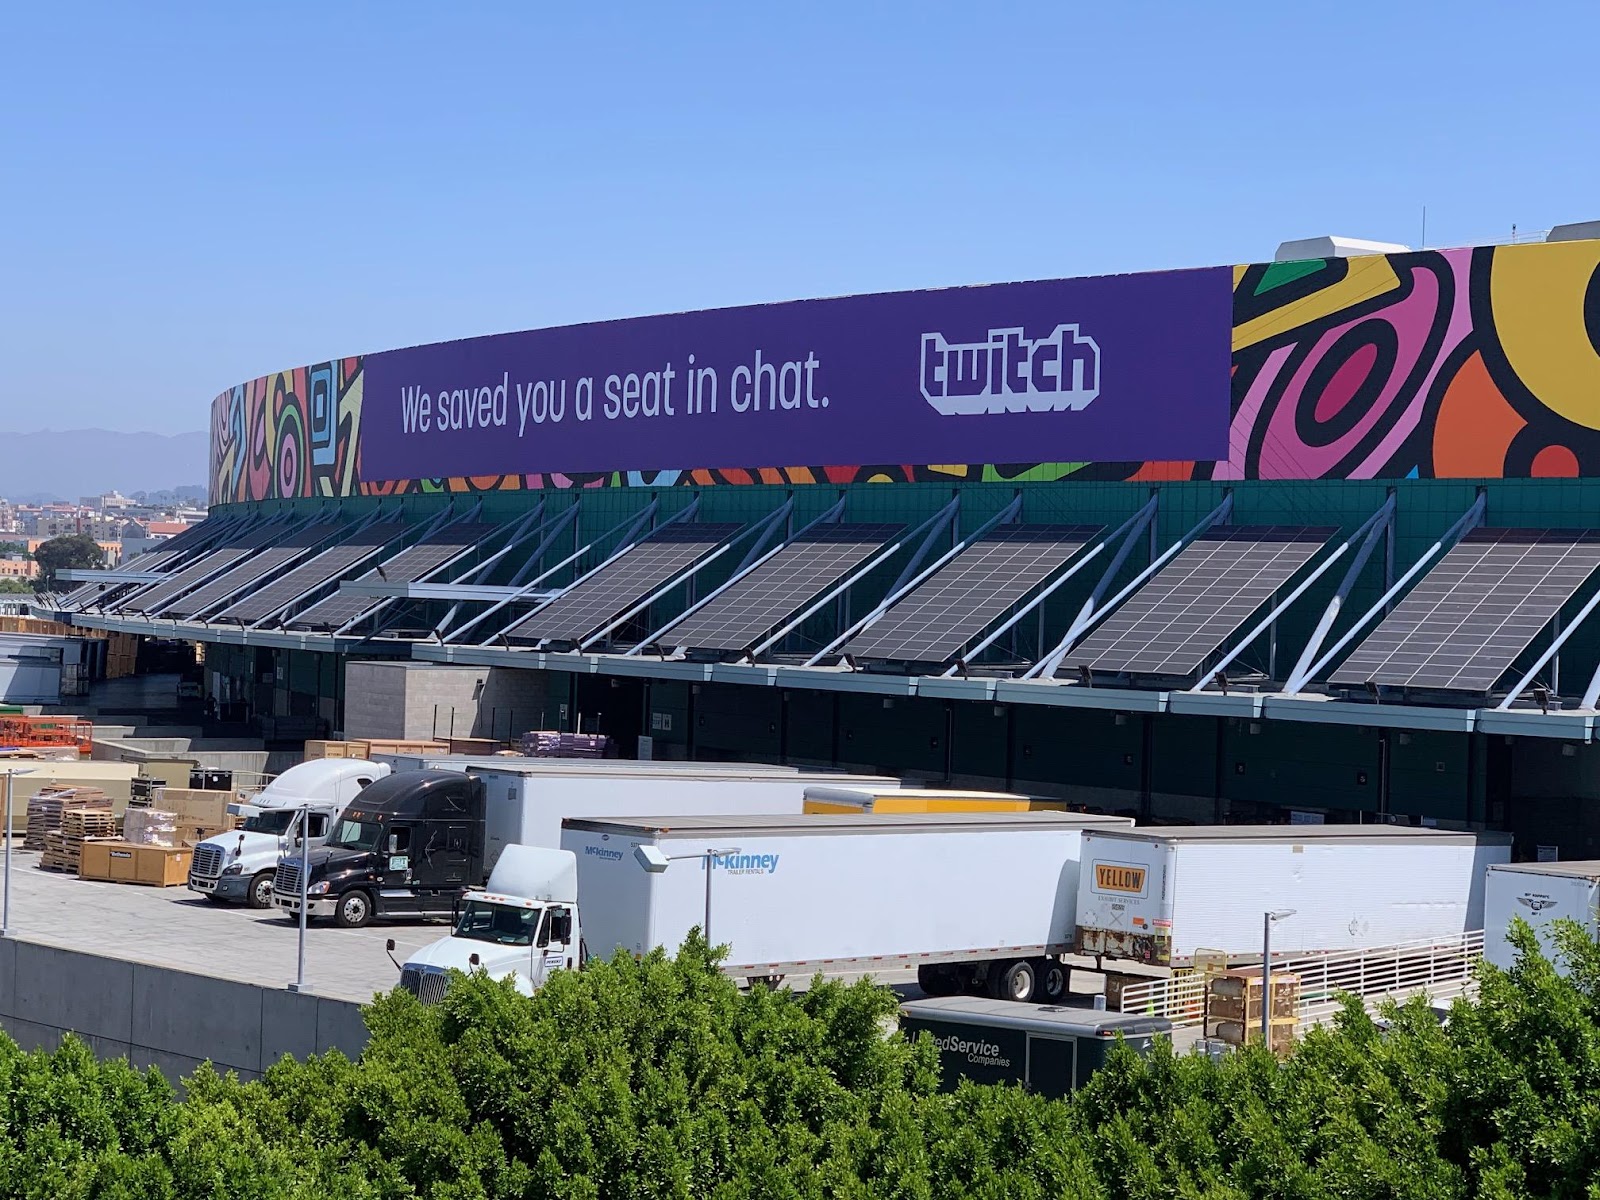 Twitch wrapping the stadium with its logo and the text "We saved you a seat in chat."